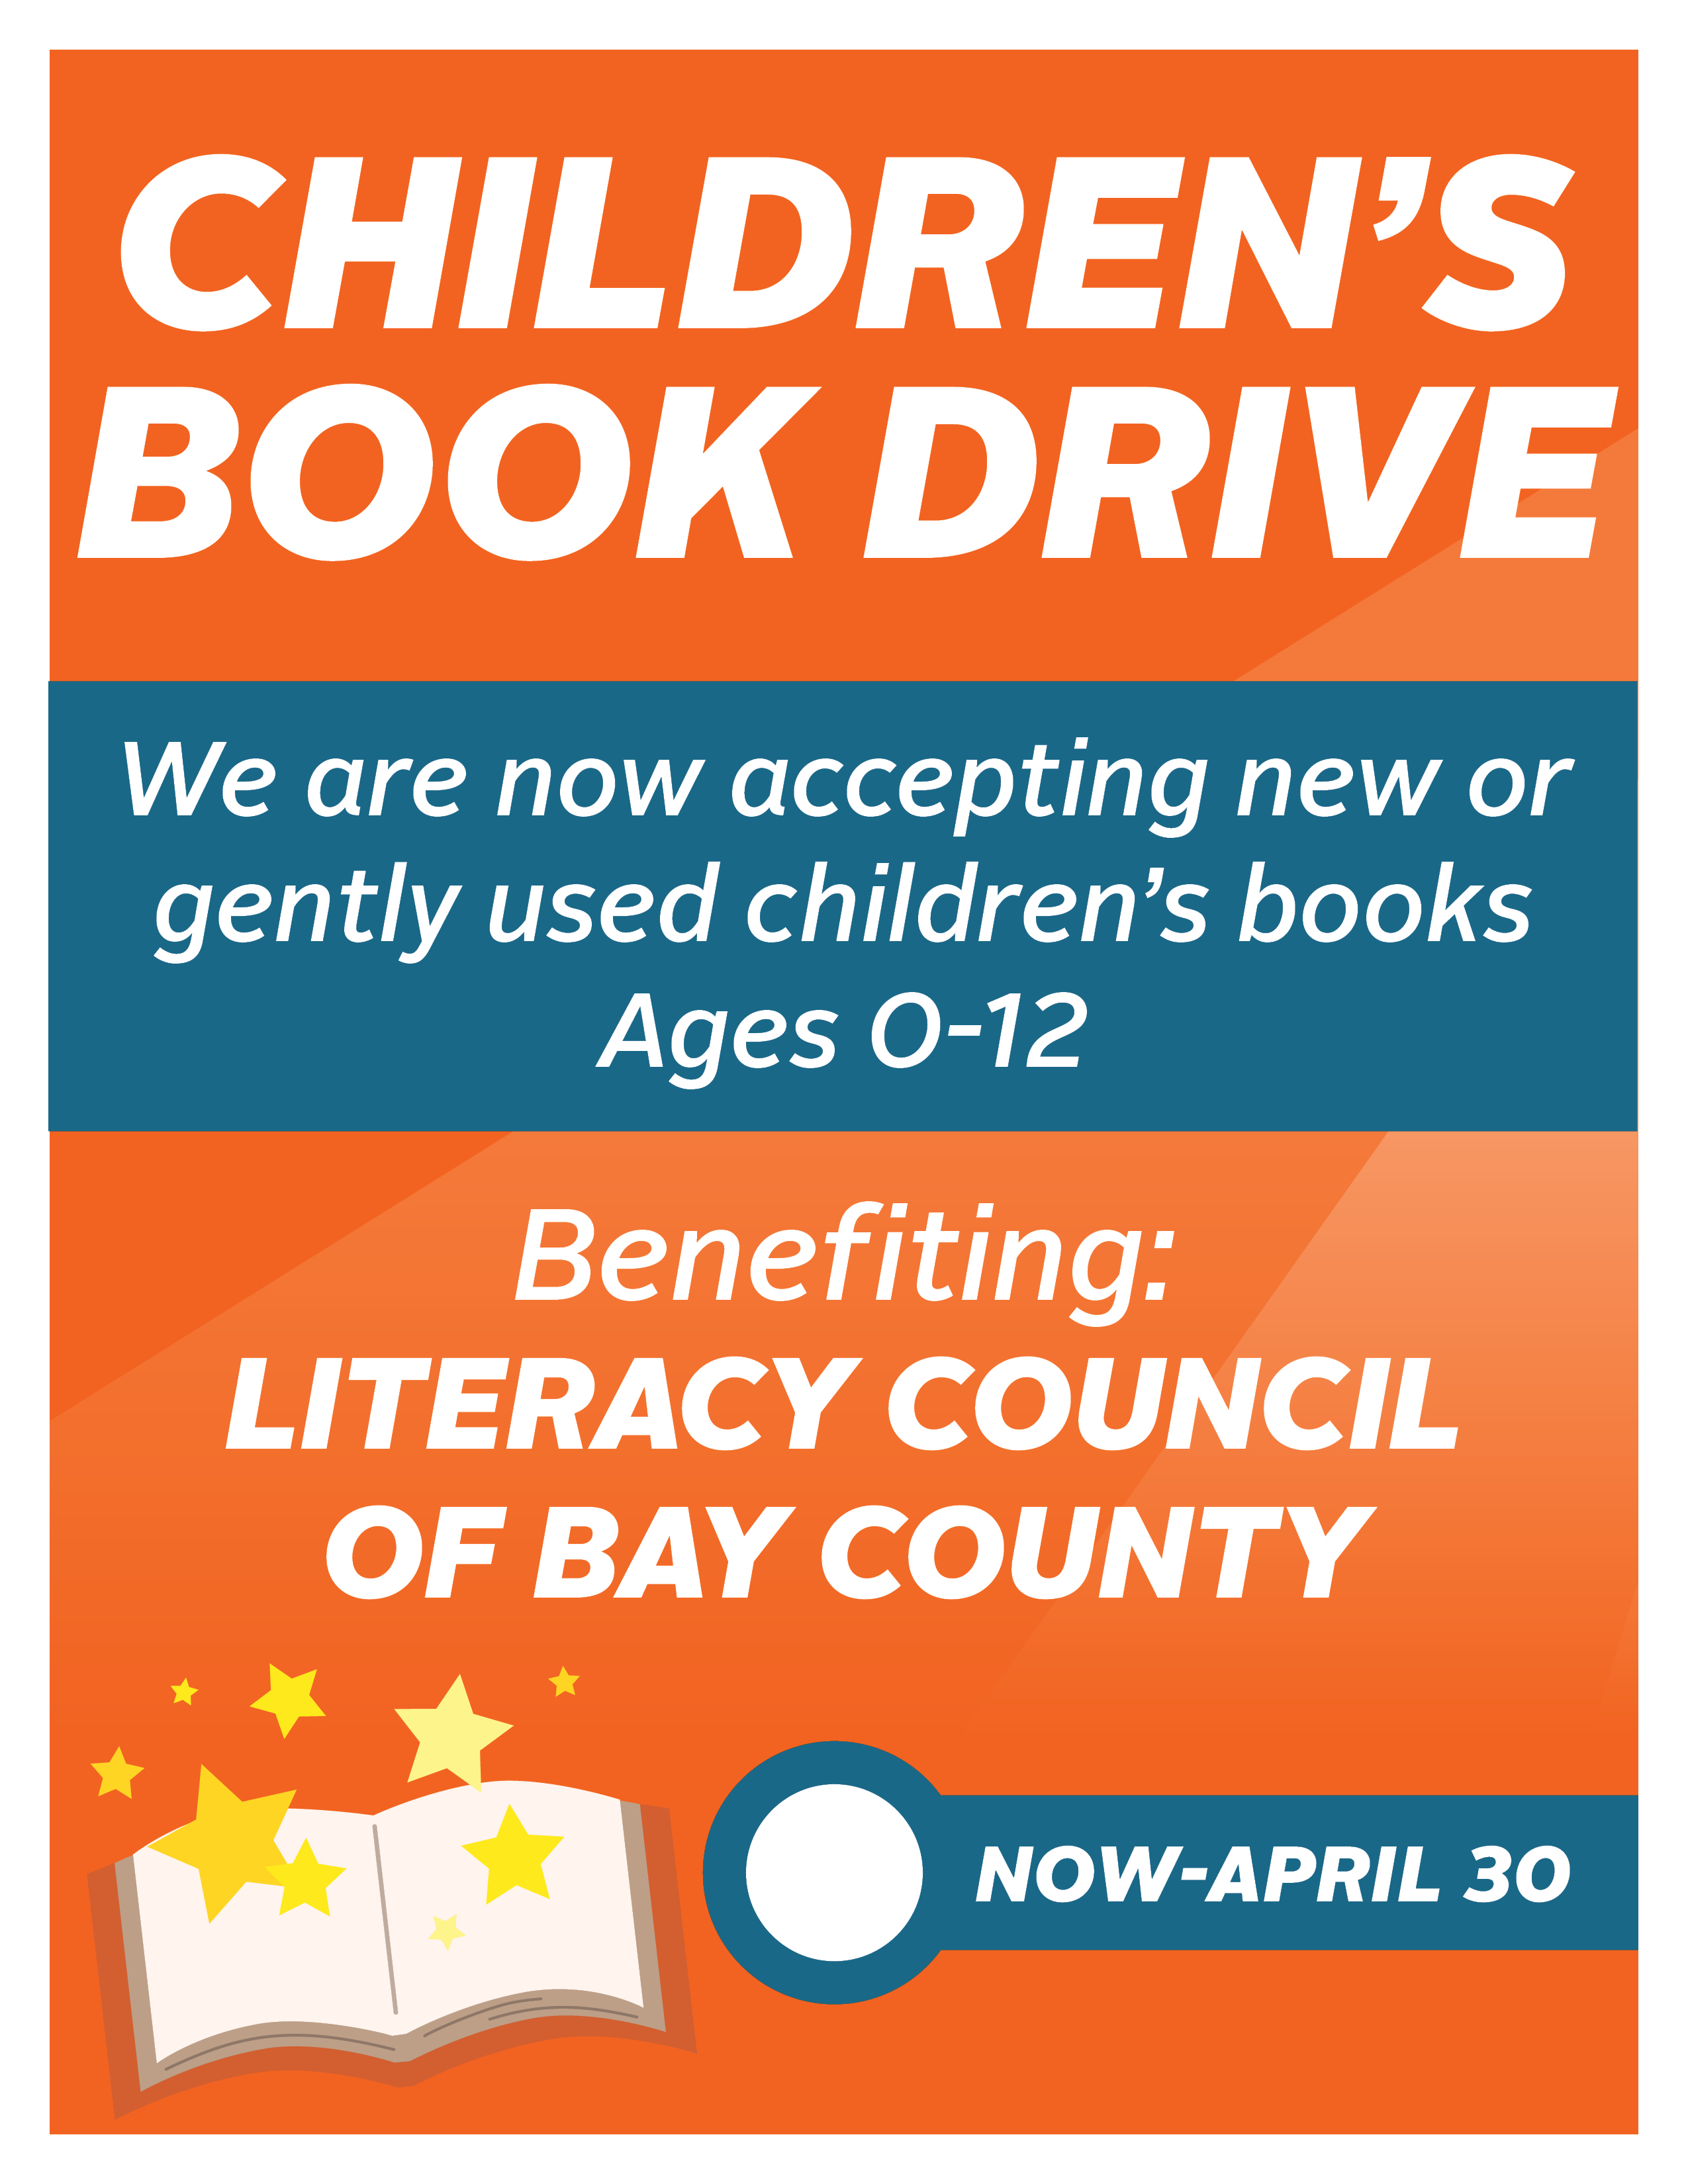 Children's Book Drive, New or Gently Used Books Ages 0-12, All Jolt Locations, Now - April 30